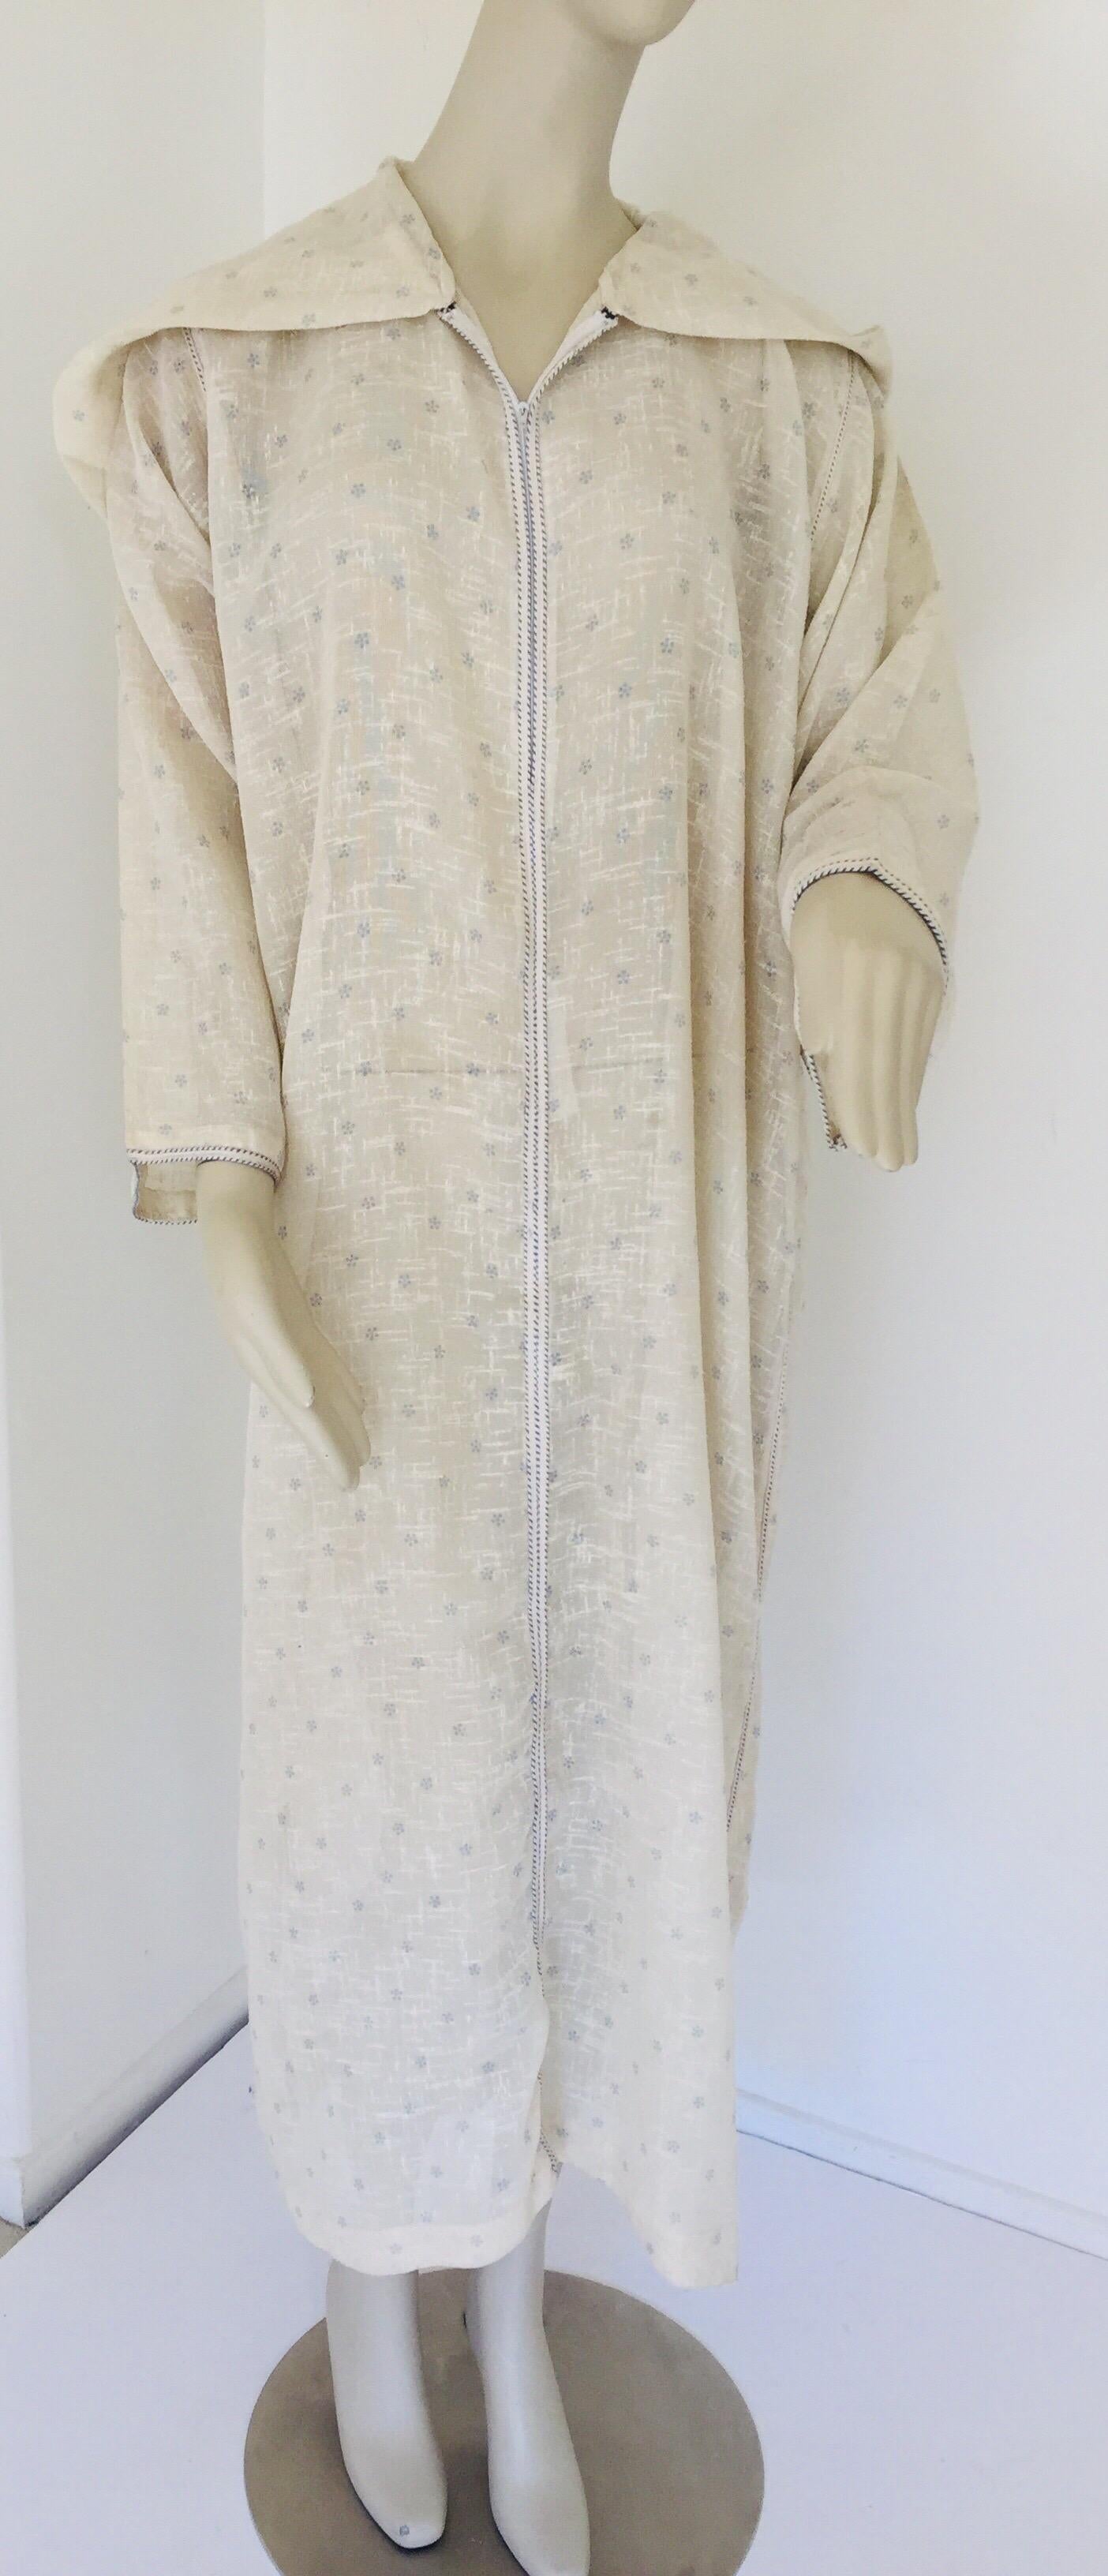 1970 Moroccan Hooded Caftan White and Blue Linen Djellabah Kaftan In Good Condition For Sale In North Hollywood, CA